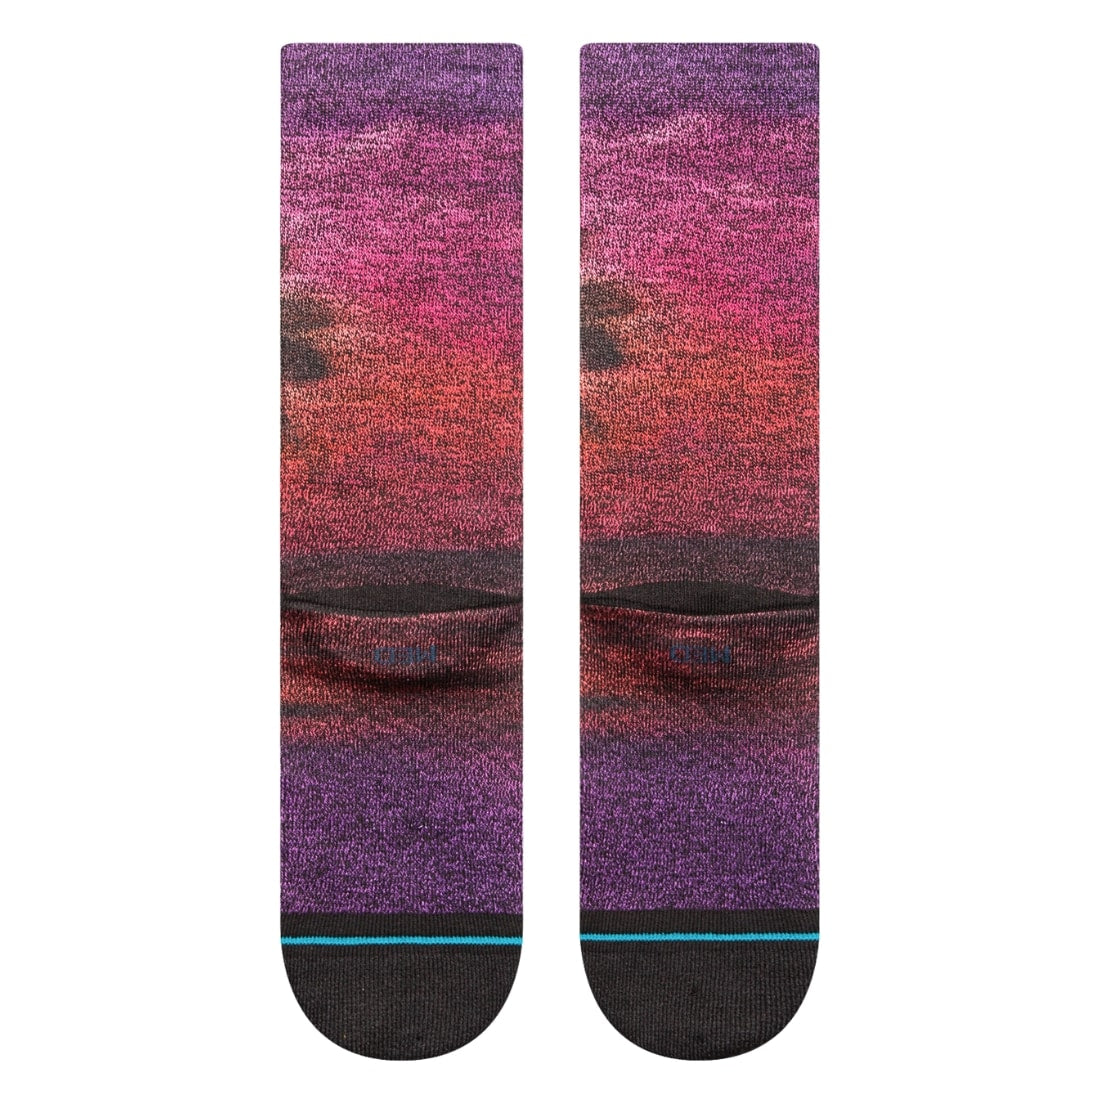 Stance Womens Vacay Mode Socks - Floral - Womens Crew Length Socks by Stance M (UK6-8.5)